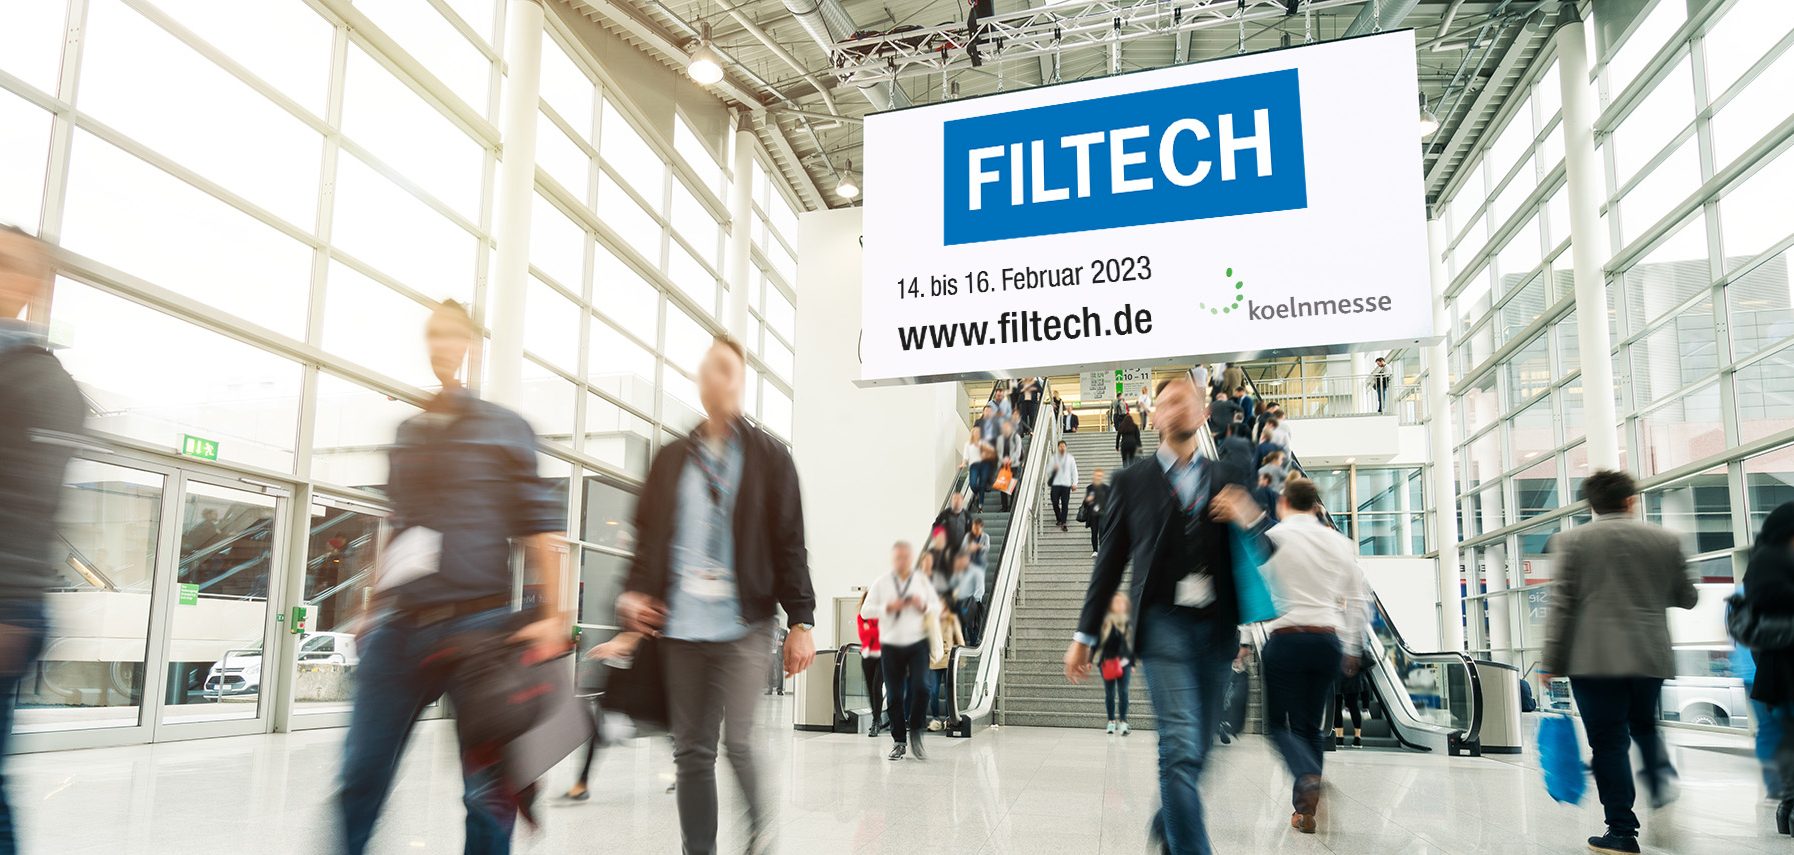 CarboTech at FILTECH 2023